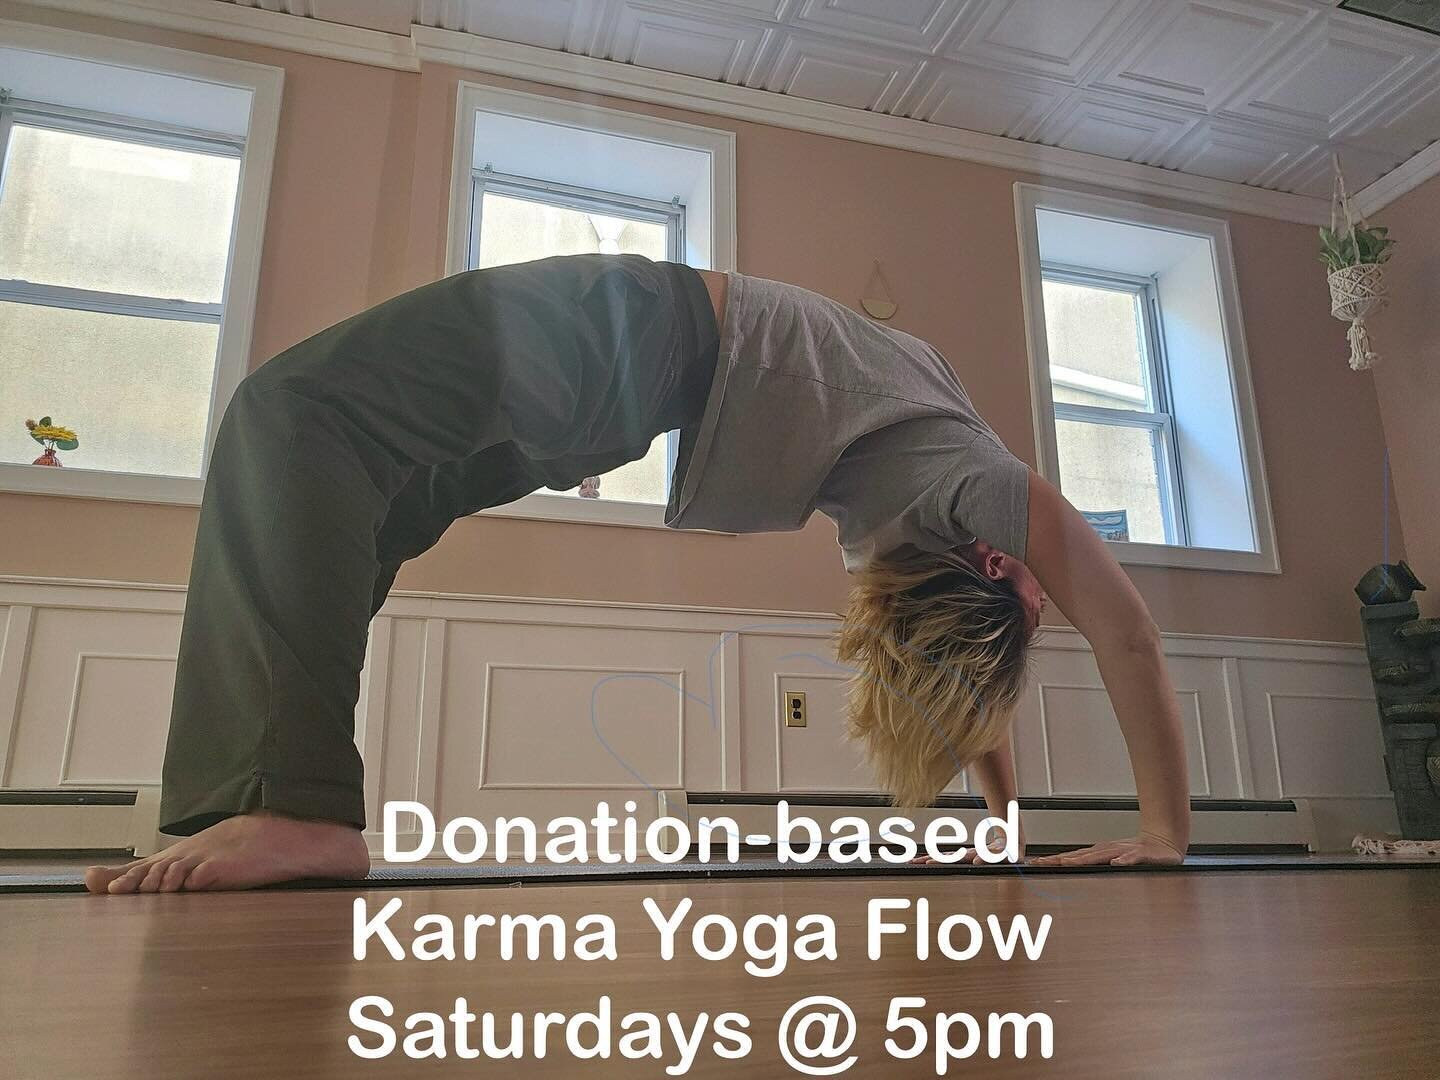 If you missed it this week, stop by next Saturday 1/20 at 5pm for our donation based class. Shoutout to our Karma yogi, Korra.